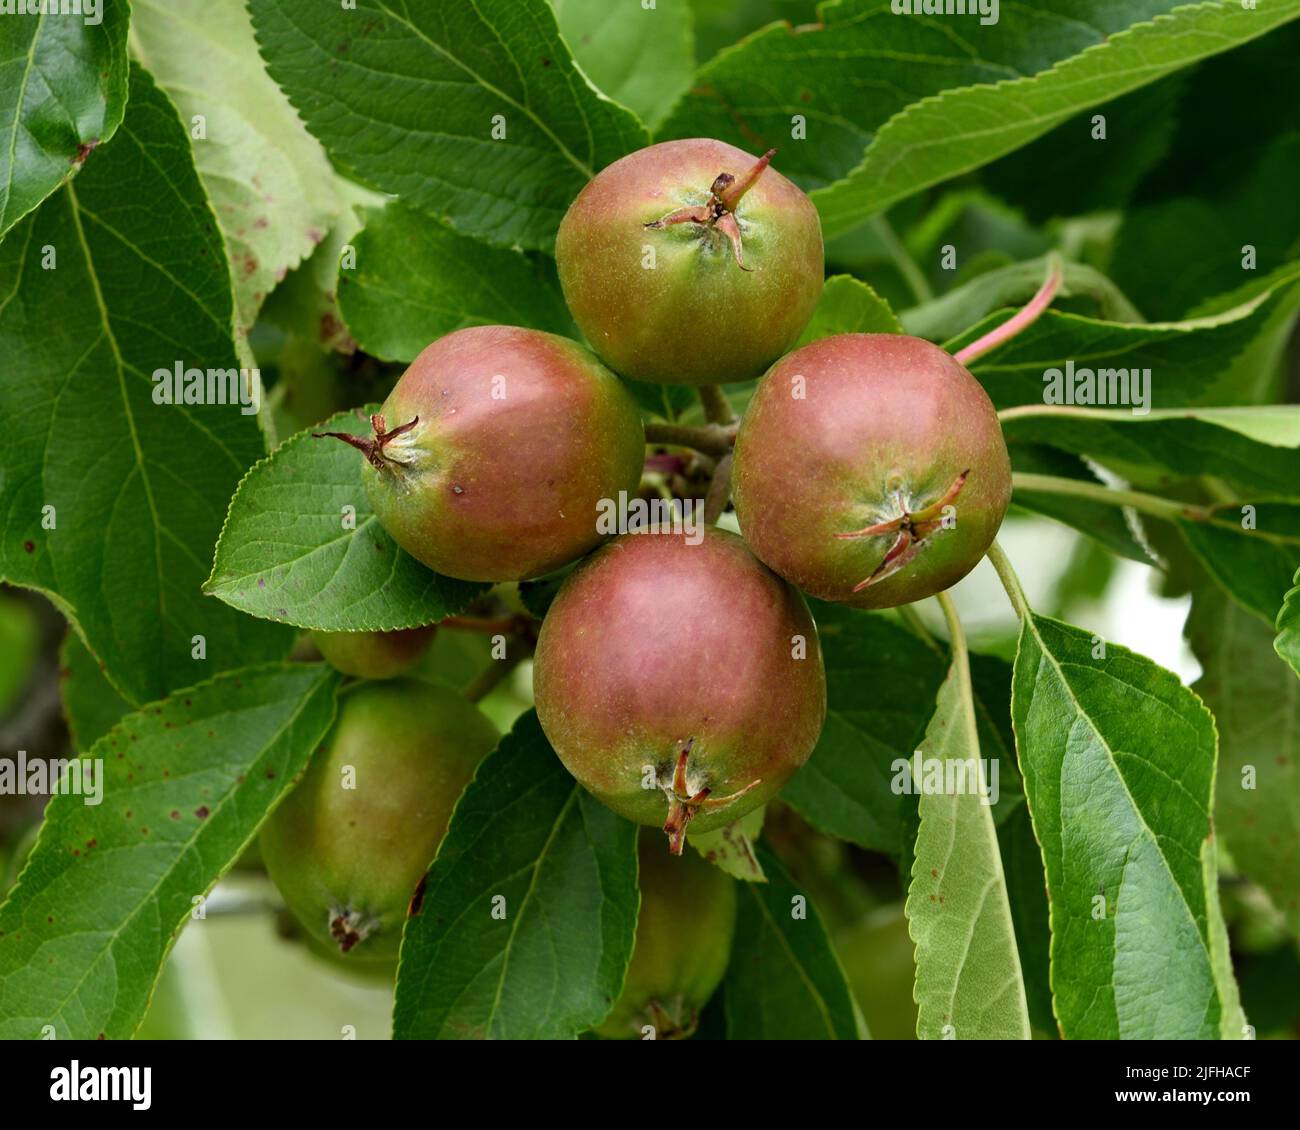 The young fruit of malus domestica Katy. Stock Photo